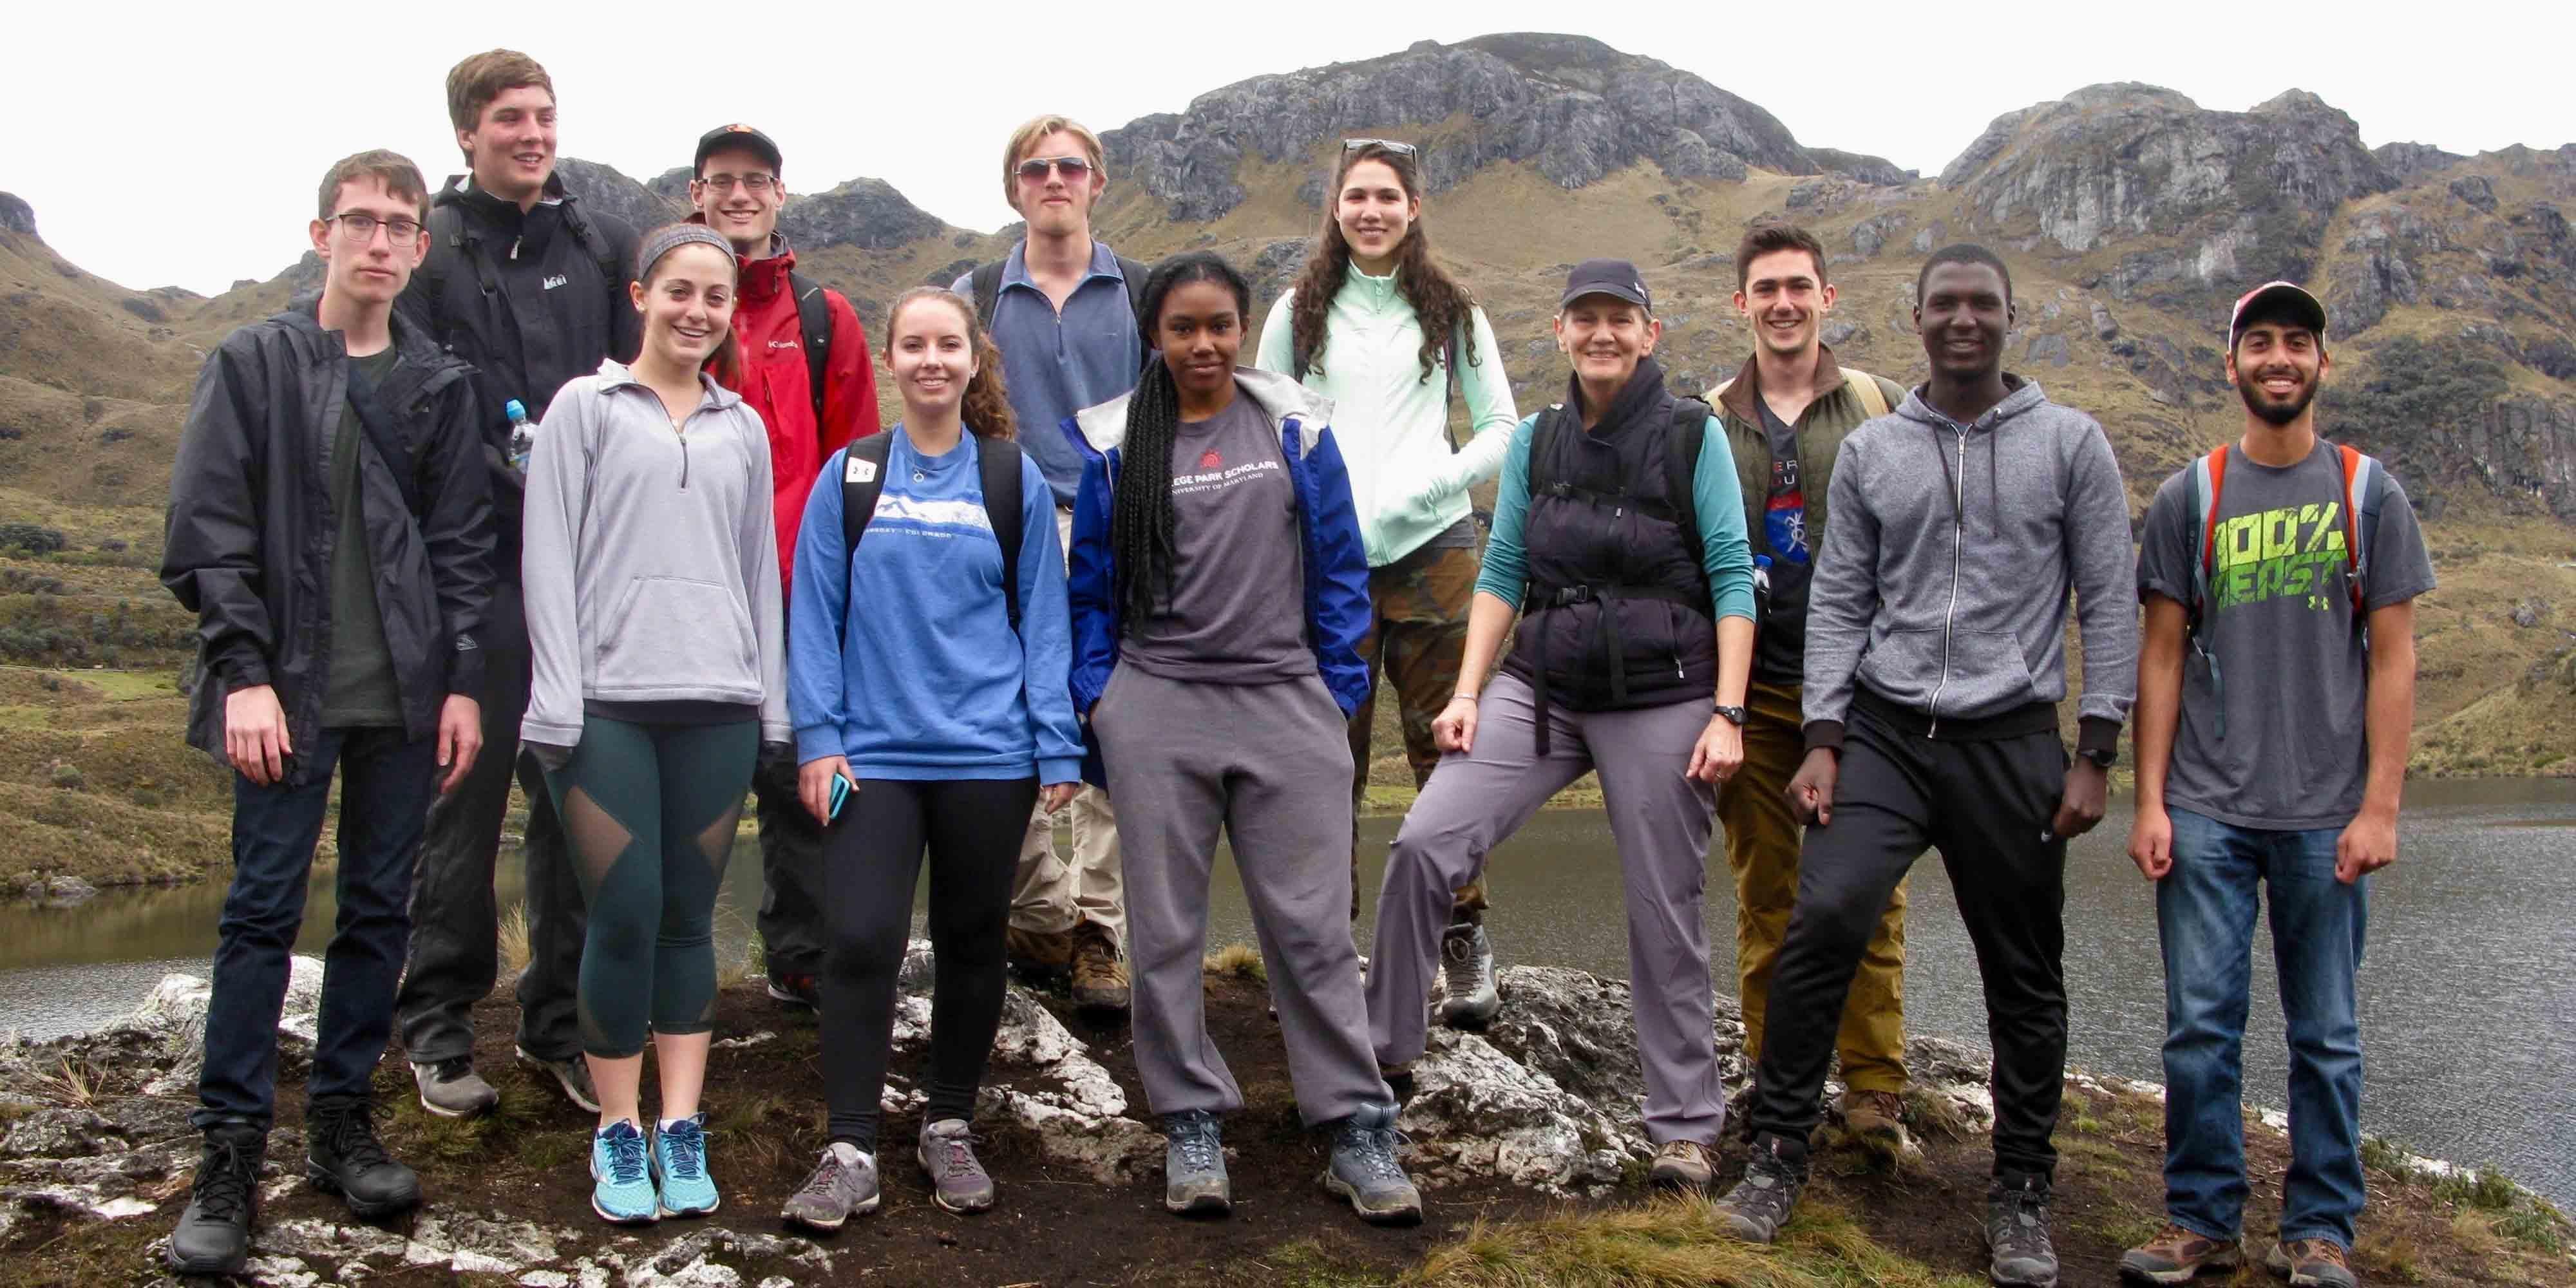 Marilee Lindemann and students posing on hilltop in Ecuador